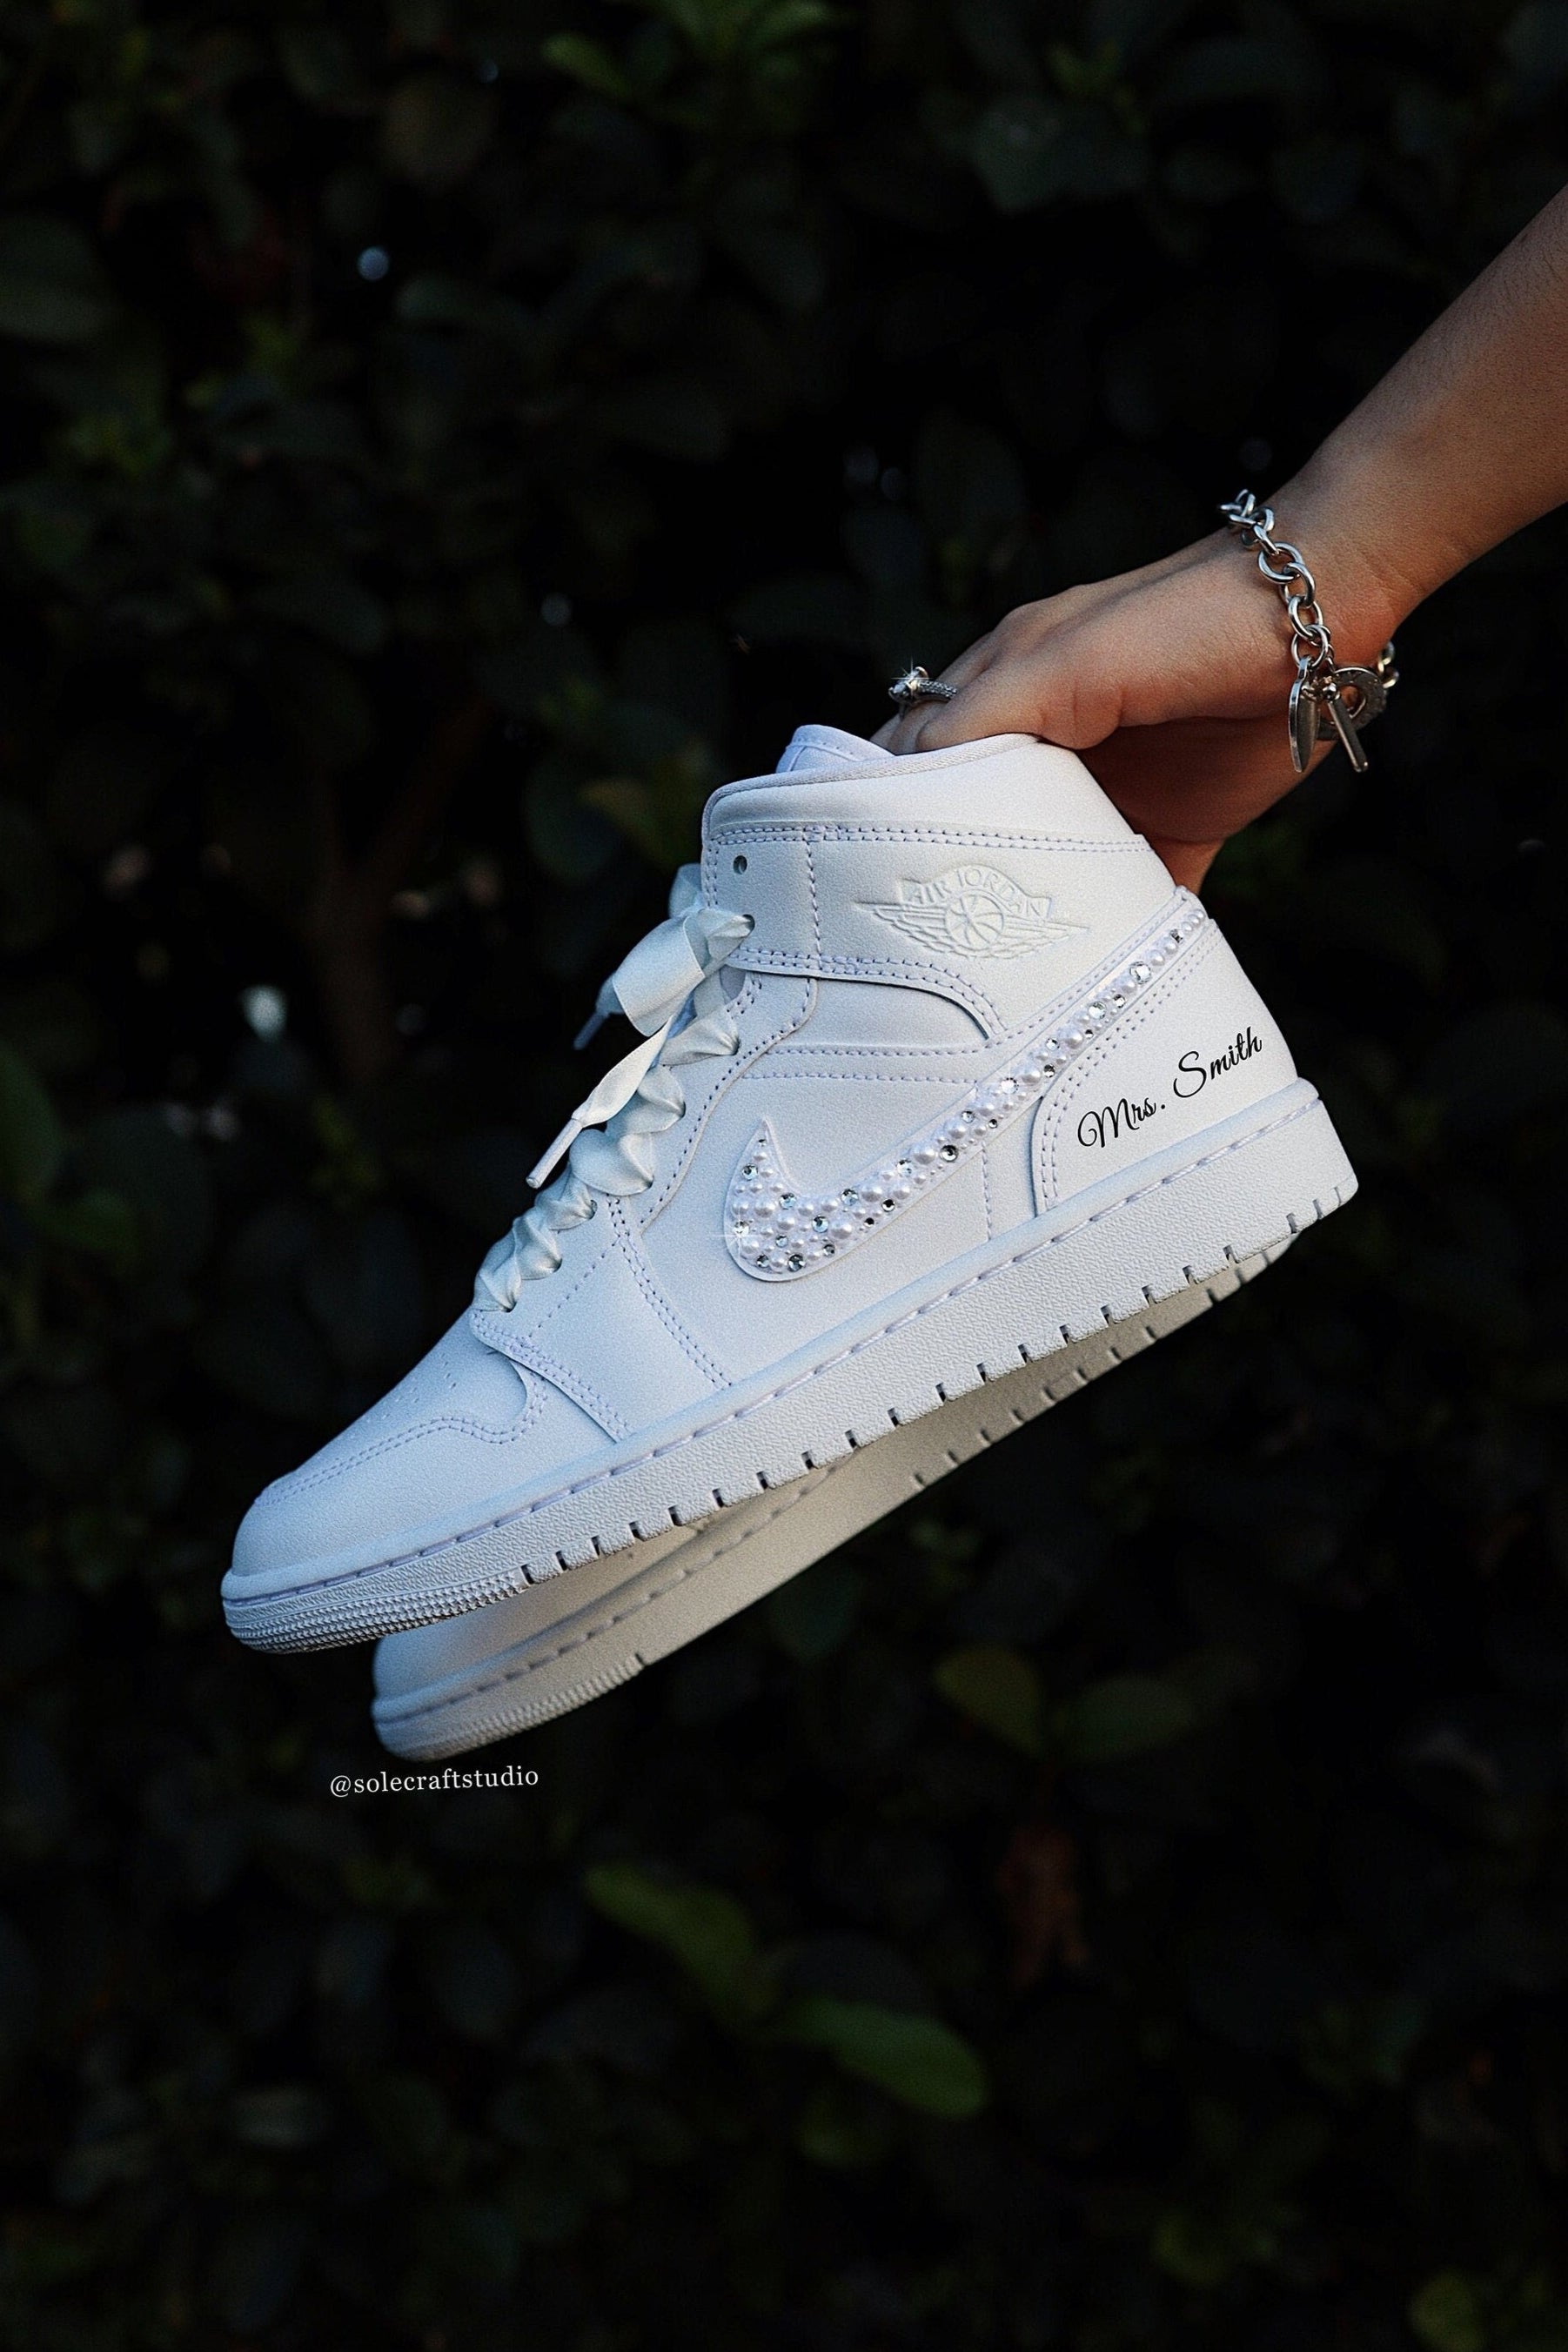 Wedding Sneakers for Bride Personalized Bridal Shoes Air Jordan 1 Mid Rhinestone Crystals and White Pearl Mix, In Hand, Side View